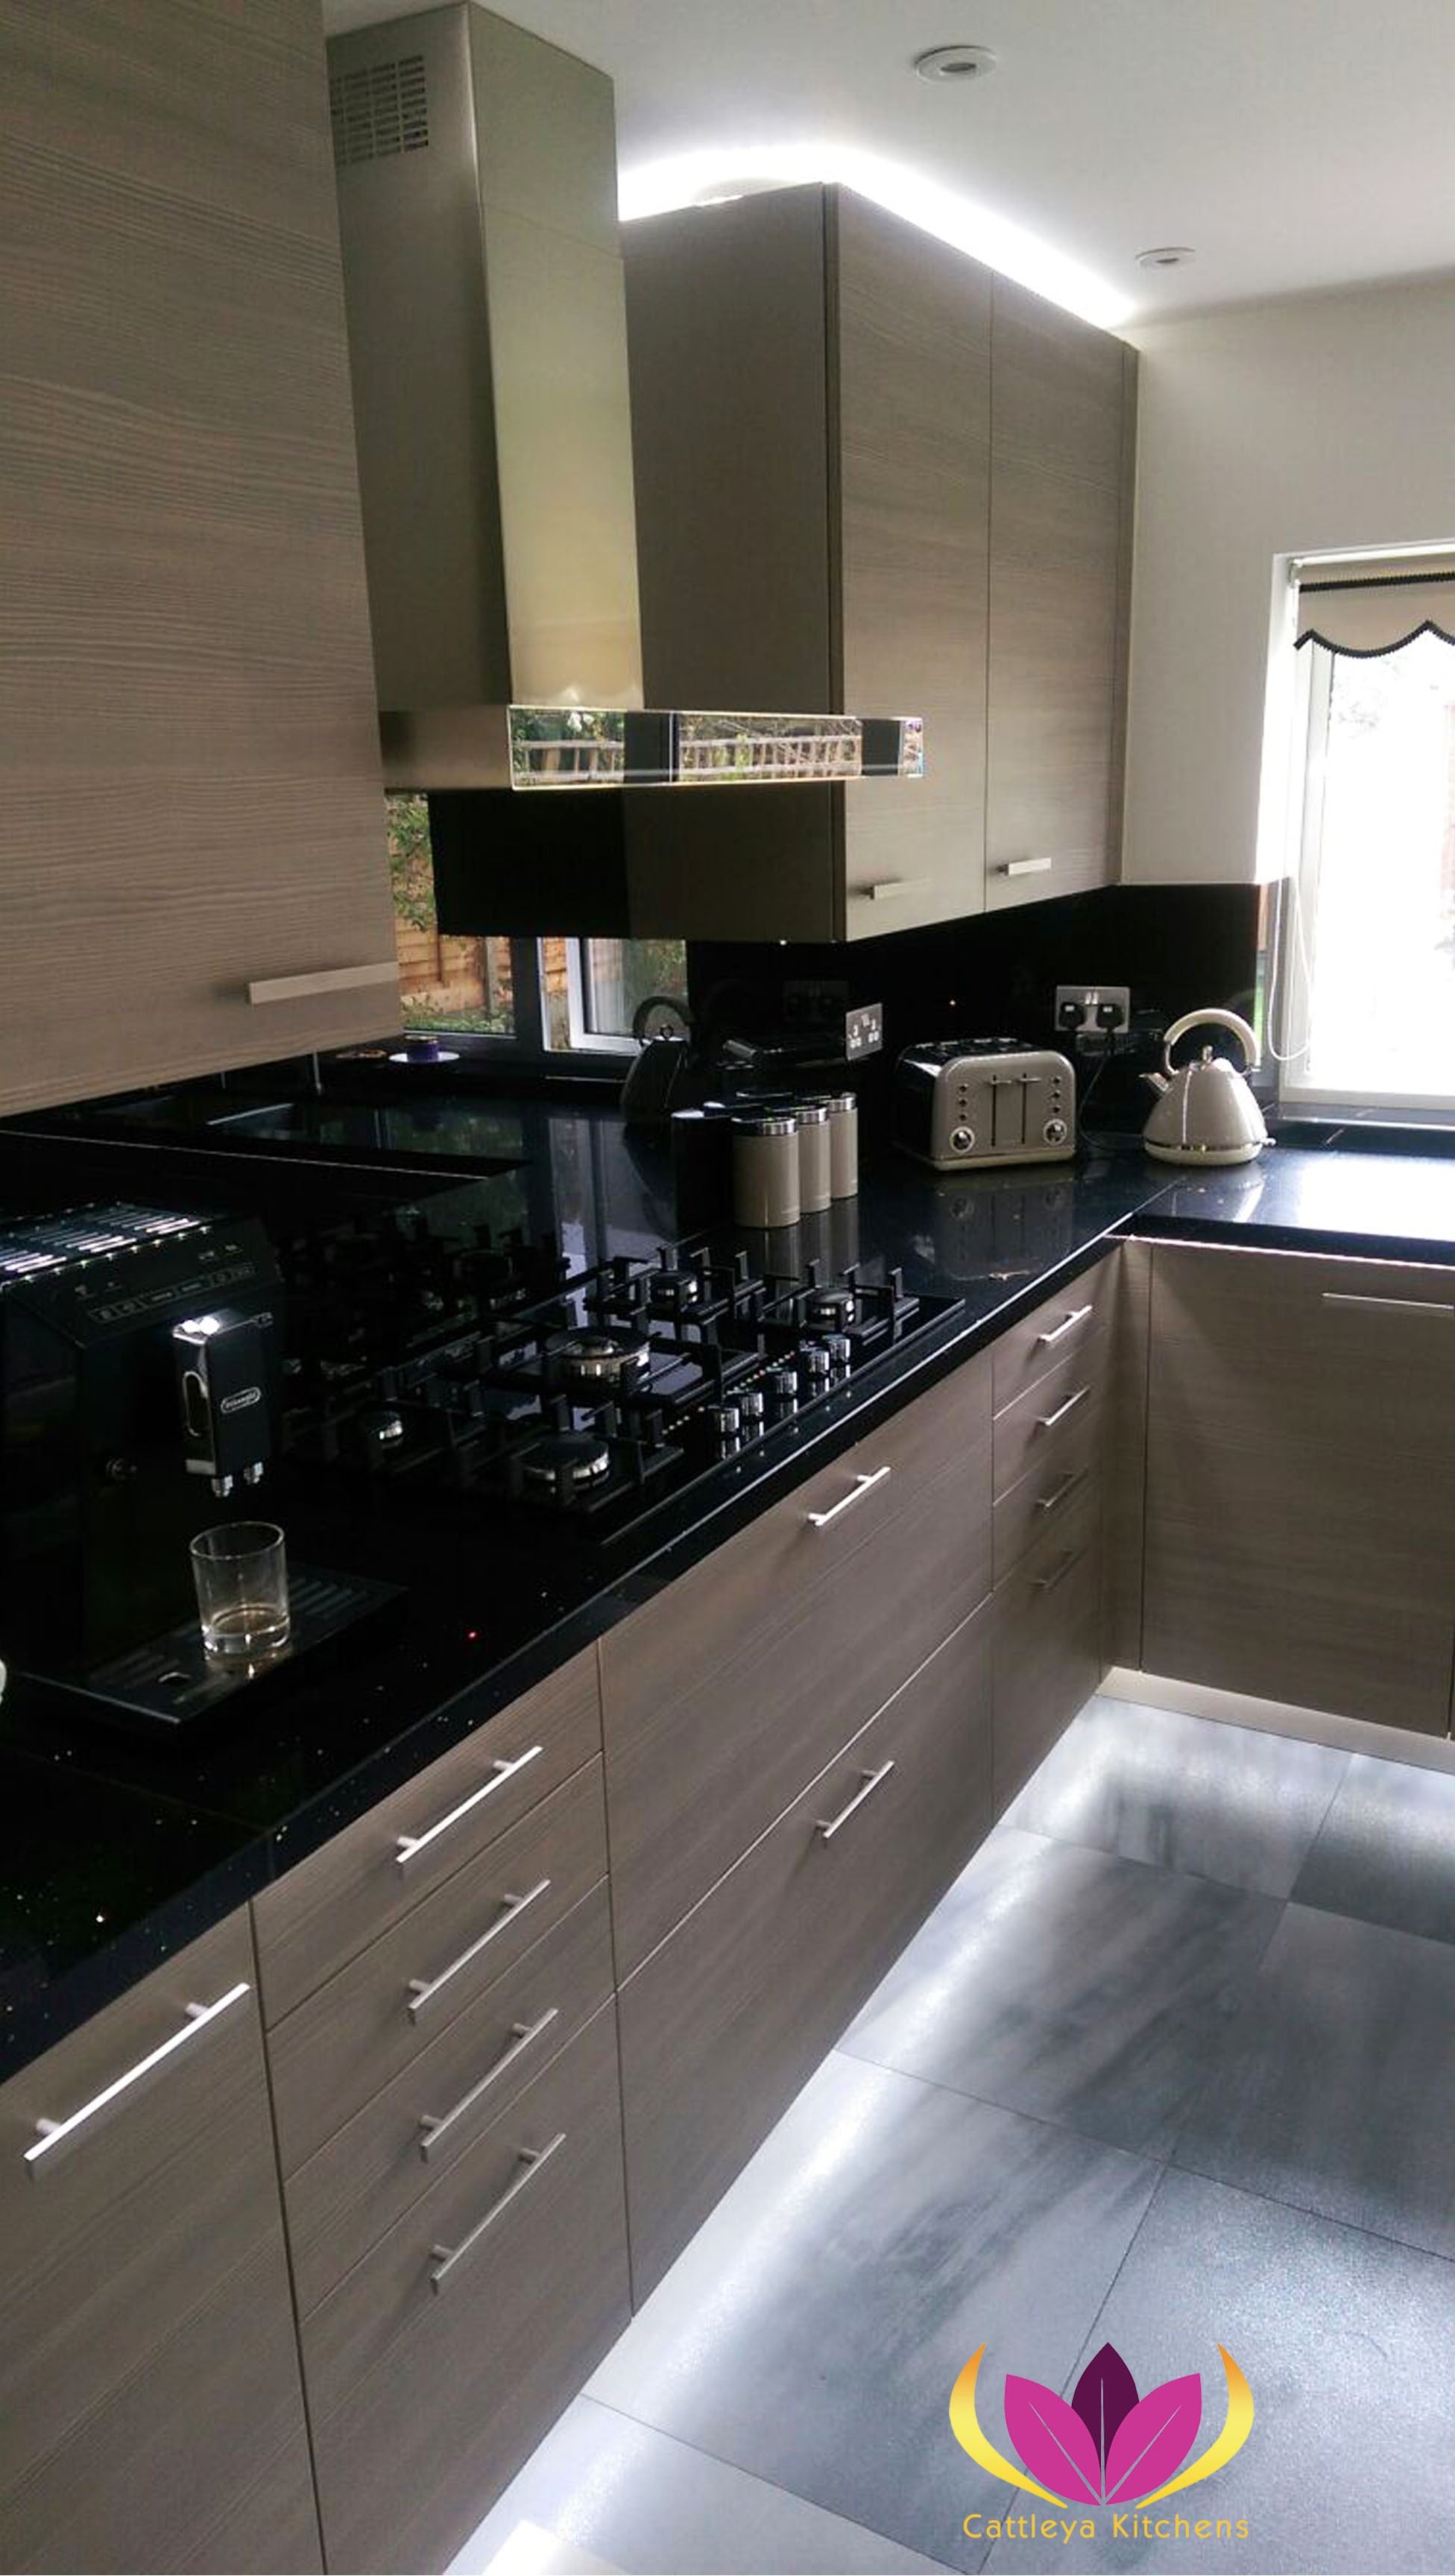 Brown & Black worktop Ealing Finished Kitchen Project